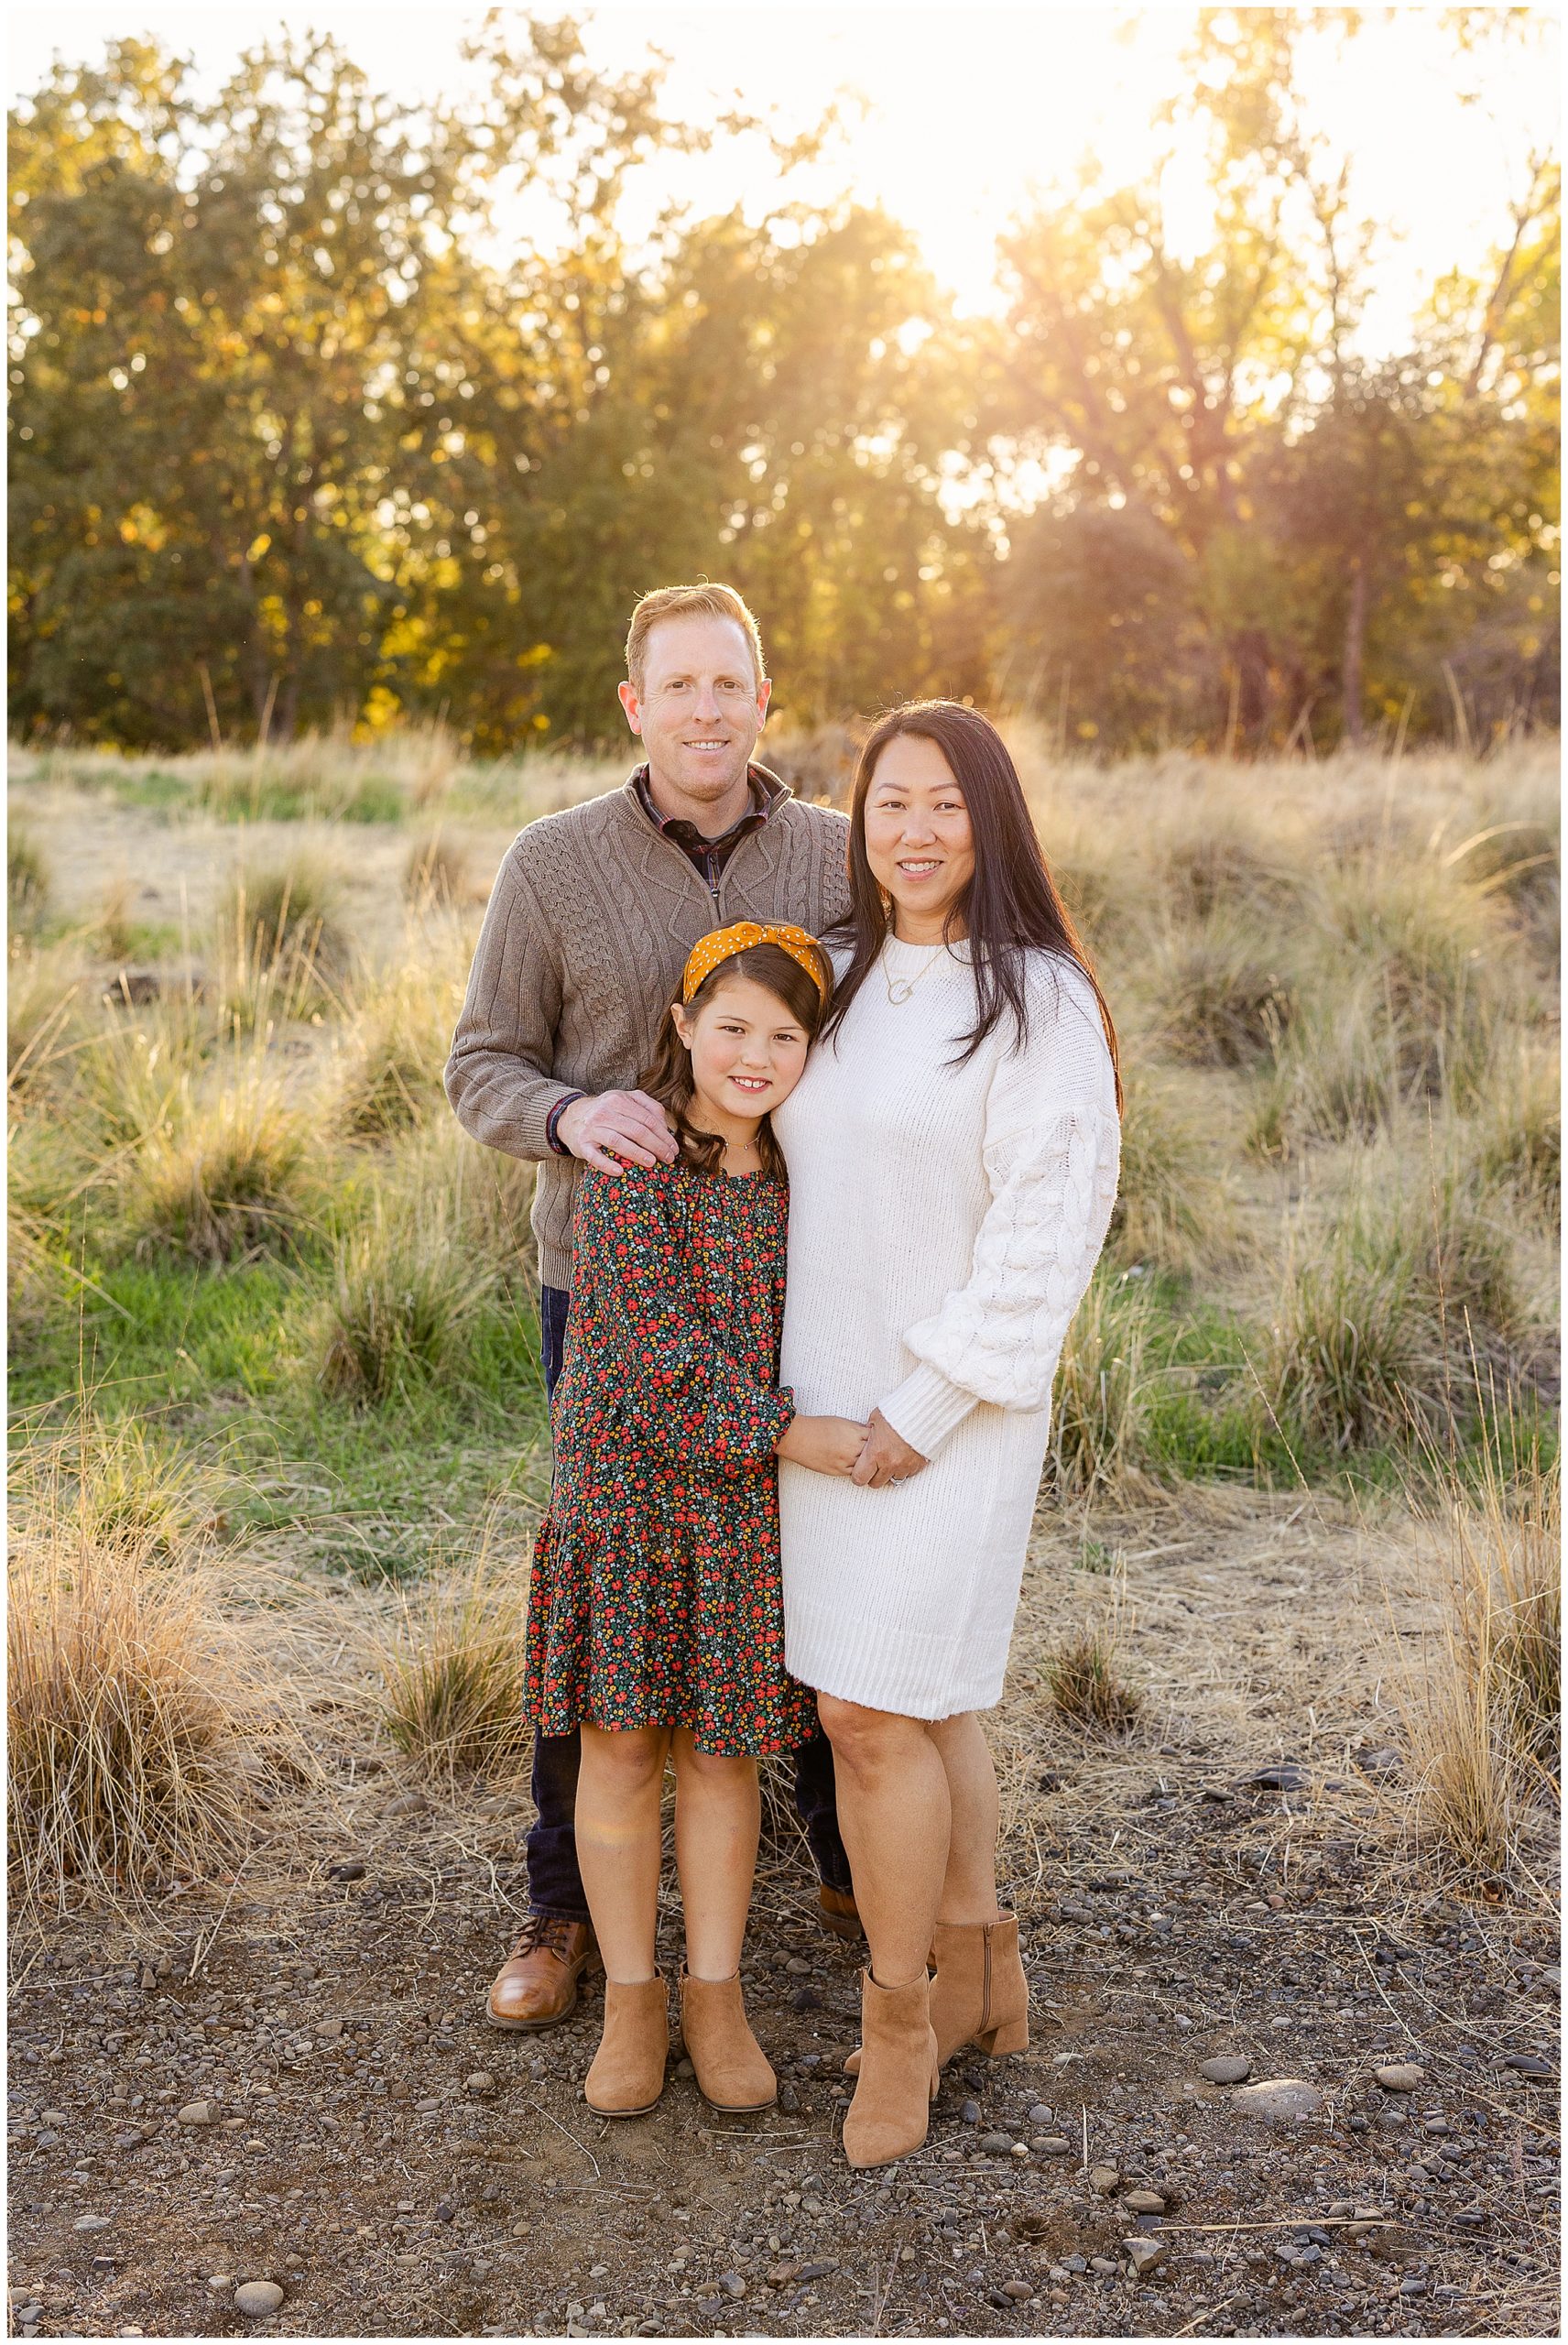 Fall Family Session in Grass Field | Jackie + Andrew